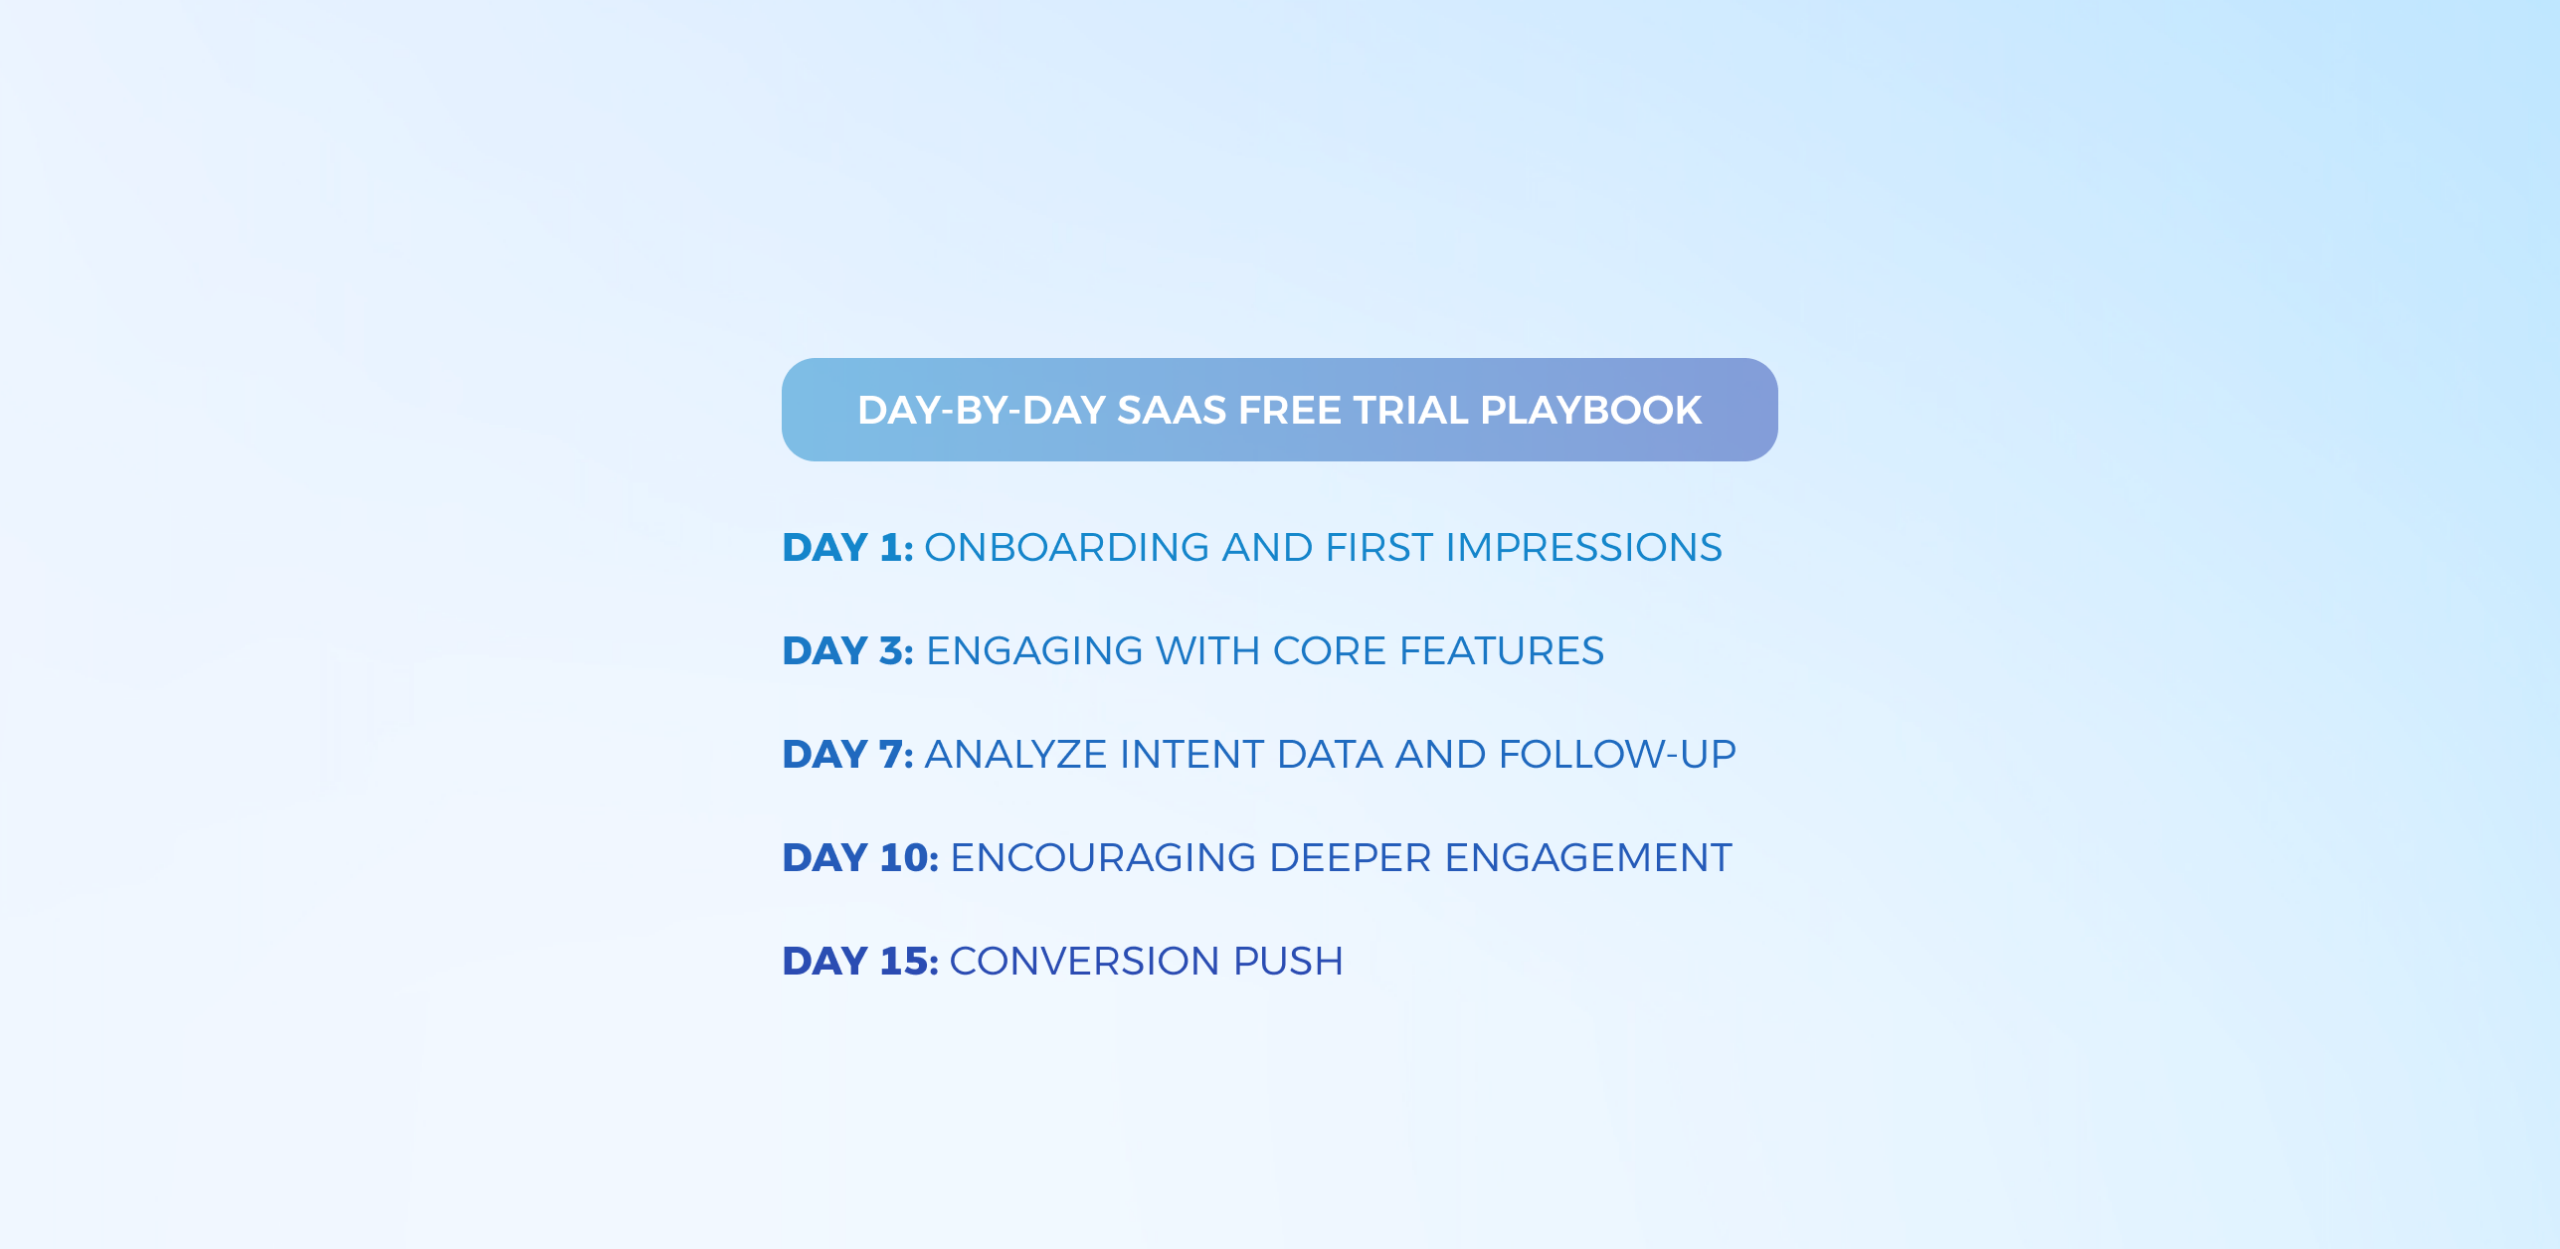 day-by-day saas free trial playbook